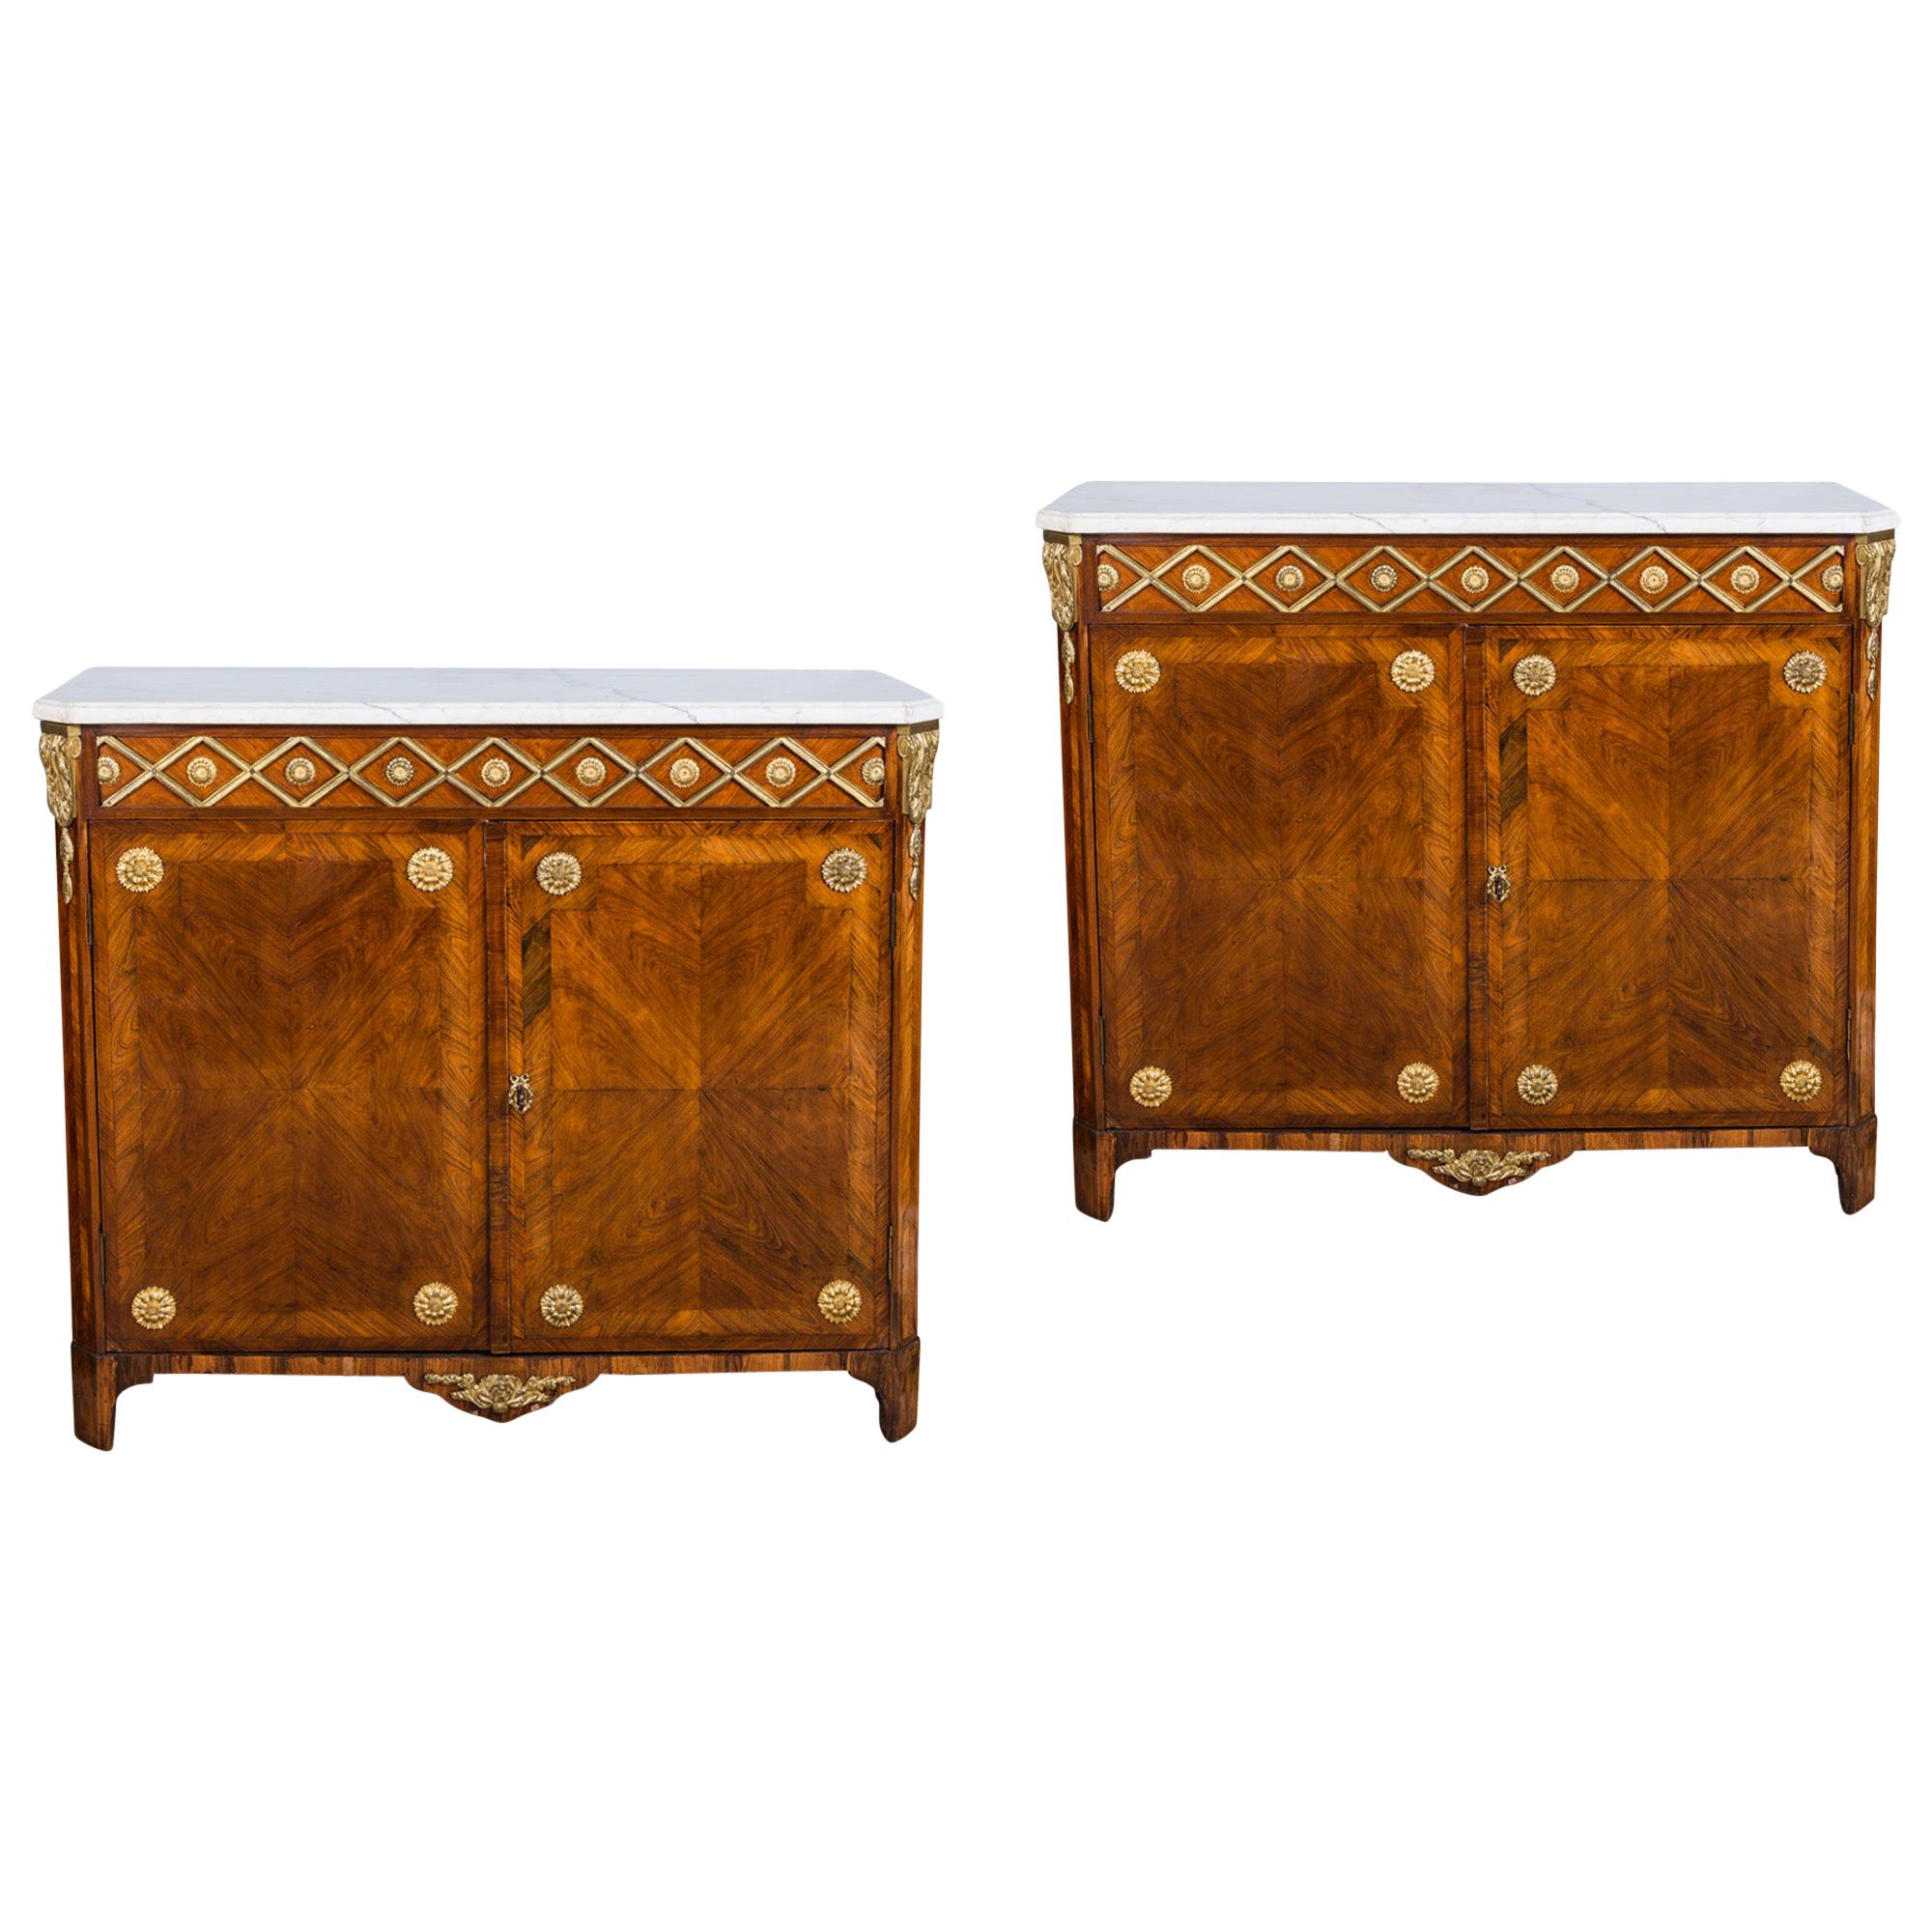 Pair of 18th Century Louis XVI Ormolu Mounted Parquetry Cabinets. For Sale